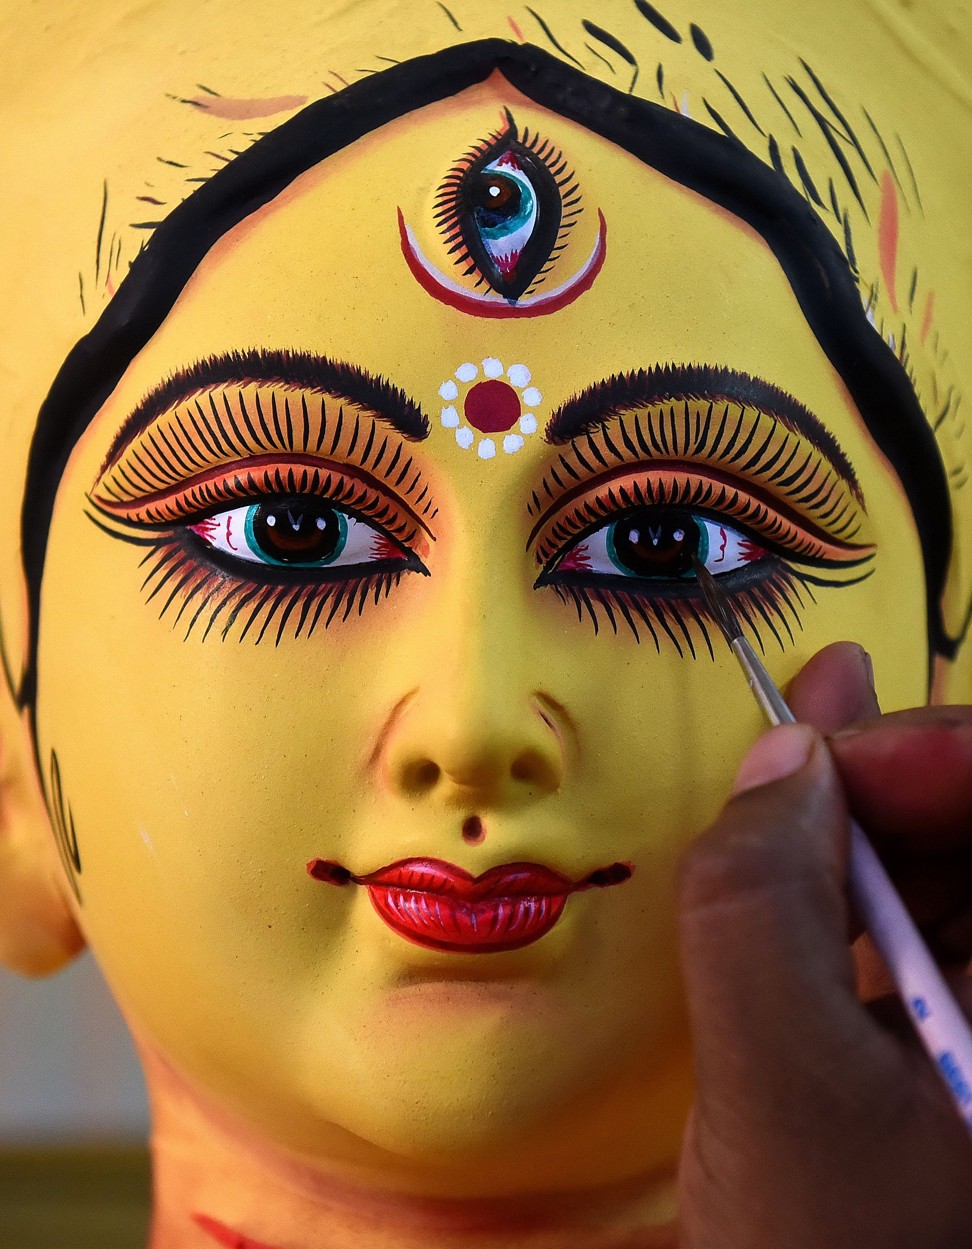 An idol of the goddess Durga being made by idol designer Kishori Mohan Pal for this year’s festival. Photo: The Times of India